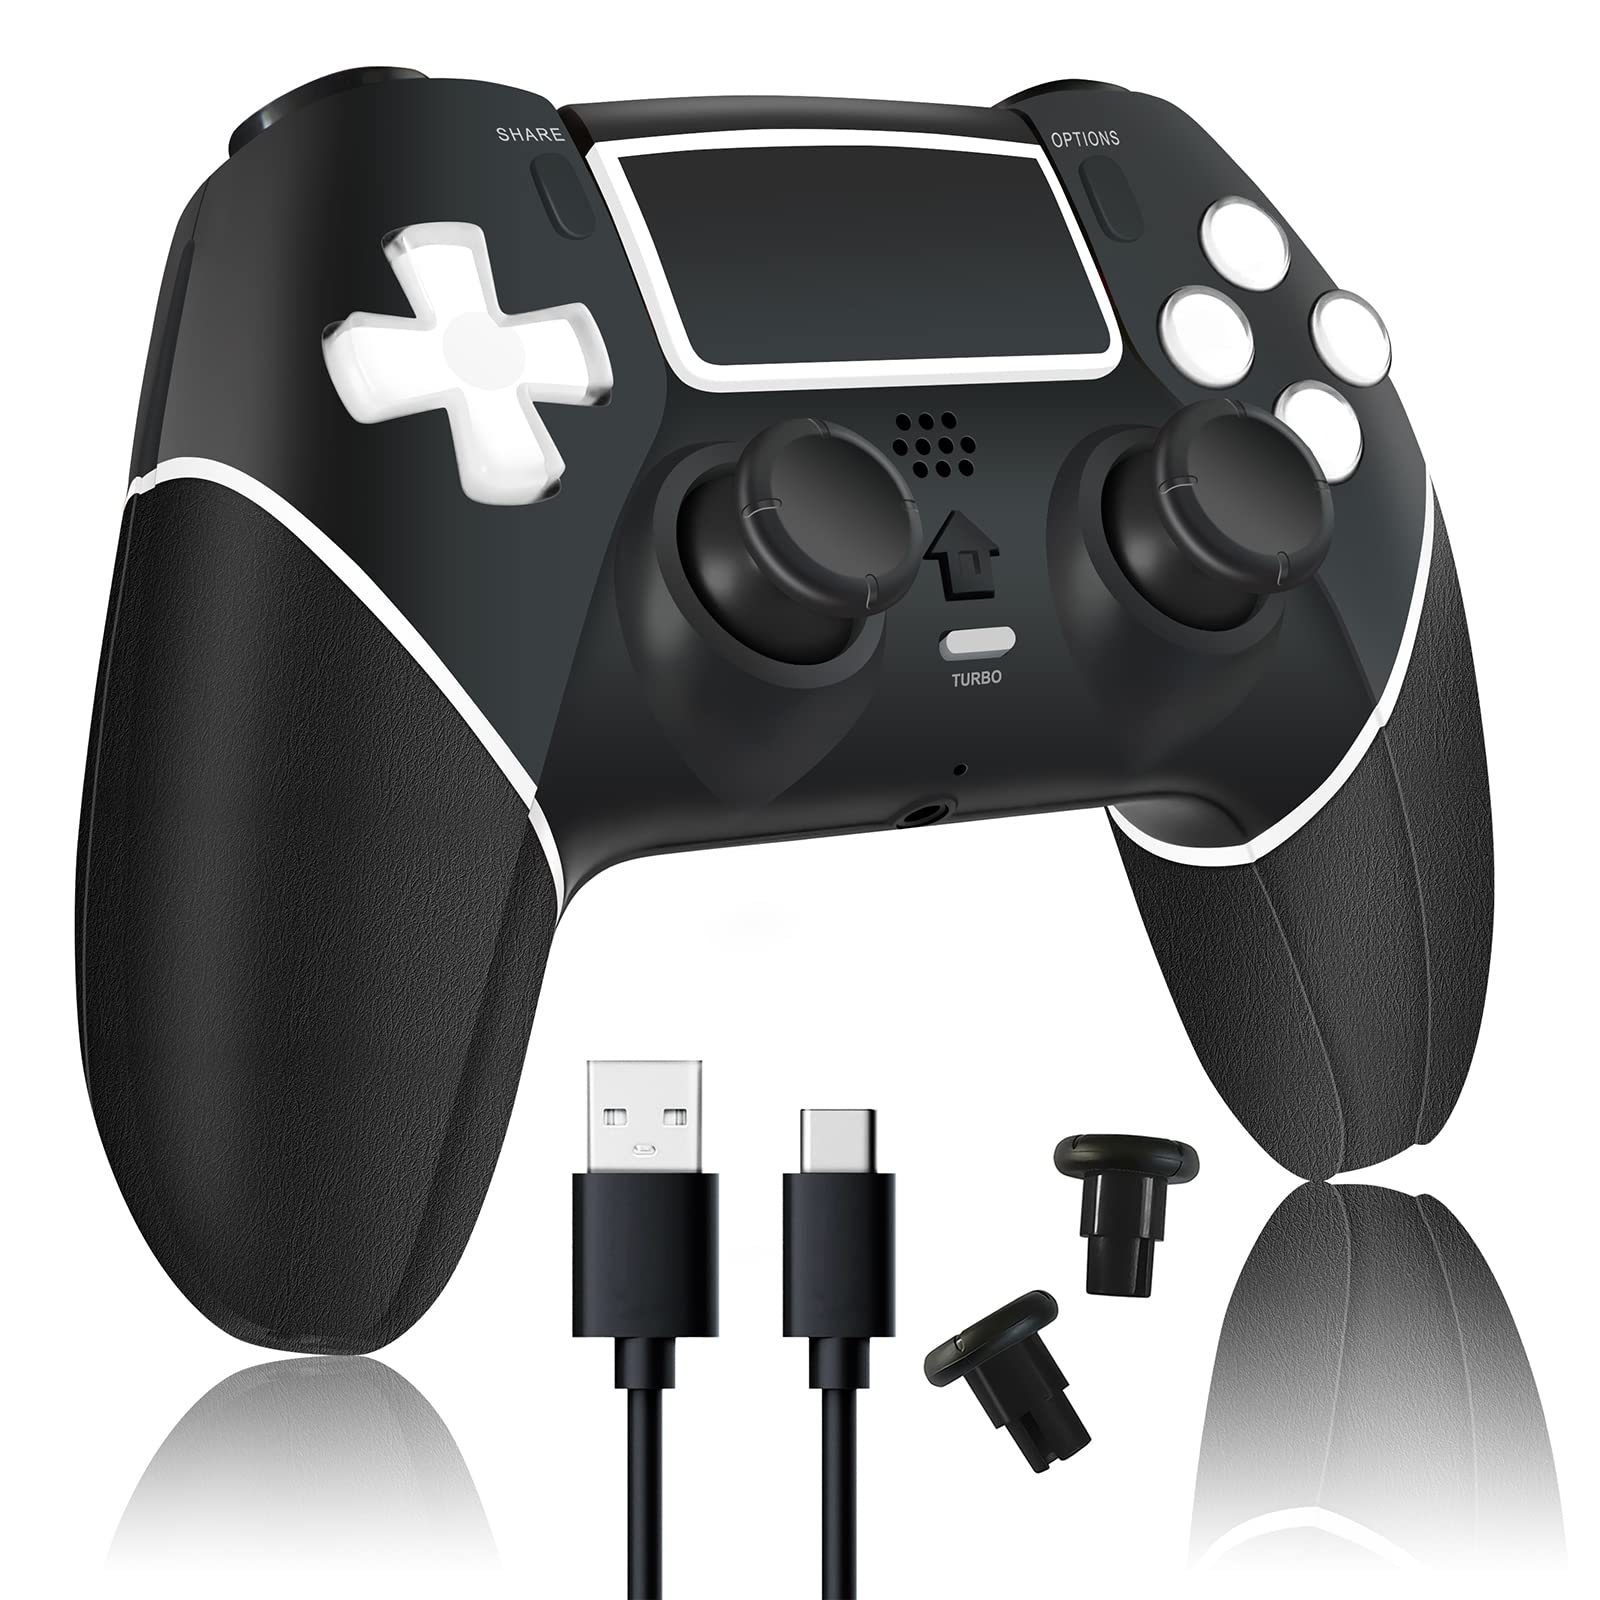 PS4 Controller for PC Gaming, Analog Wireless Controller with Back Buttons, Gamepad PS4 Remote Controller for Pro/Slim (Black)